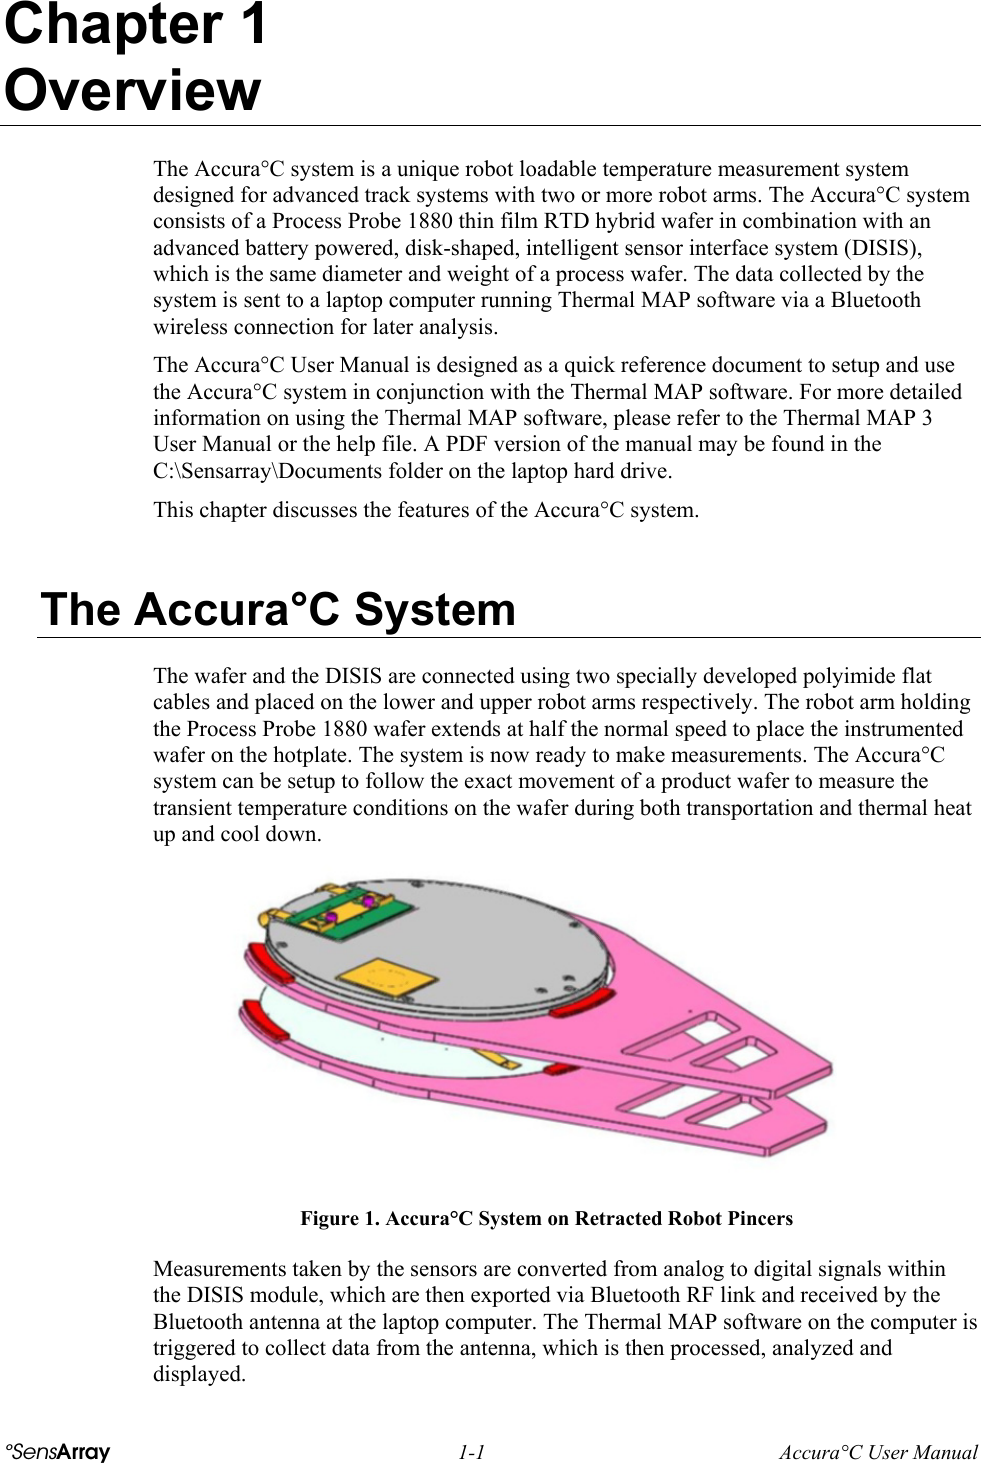  °SensArray 1-1 Accura°C User Manual Chapter 1 Overview The Accura°C system is a unique robot loadable temperature measurement system designed for advanced track systems with two or more robot arms. The Accura°C system consists of a Process Probe 1880 thin film RTD hybrid wafer in combination with an advanced battery powered, disk-shaped, intelligent sensor interface system (DISIS), which is the same diameter and weight of a process wafer. The data collected by the system is sent to a laptop computer running Thermal MAP software via a Bluetooth wireless connection for later analysis. The Accura°C User Manual is designed as a quick reference document to setup and use the Accura°C system in conjunction with the Thermal MAP software. For more detailed information on using the Thermal MAP software, please refer to the Thermal MAP 3 User Manual or the help file. A PDF version of the manual may be found in the C:\Sensarray\Documents folder on the laptop hard drive. This chapter discusses the features of the Accura°C system.  The Accura°C System The wafer and the DISIS are connected using two specially developed polyimide flat cables and placed on the lower and upper robot arms respectively. The robot arm holding the Process Probe 1880 wafer extends at half the normal speed to place the instrumented wafer on the hotplate. The system is now ready to make measurements. The Accura°C system can be setup to follow the exact movement of a product wafer to measure the transient temperature conditions on the wafer during both transportation and thermal heat up and cool down.  Figure 1. Accura°C System on Retracted Robot Pincers Measurements taken by the sensors are converted from analog to digital signals within the DISIS module, which are then exported via Bluetooth RF link and received by the Bluetooth antenna at the laptop computer. The Thermal MAP software on the computer is triggered to collect data from the antenna, which is then processed, analyzed and displayed.  